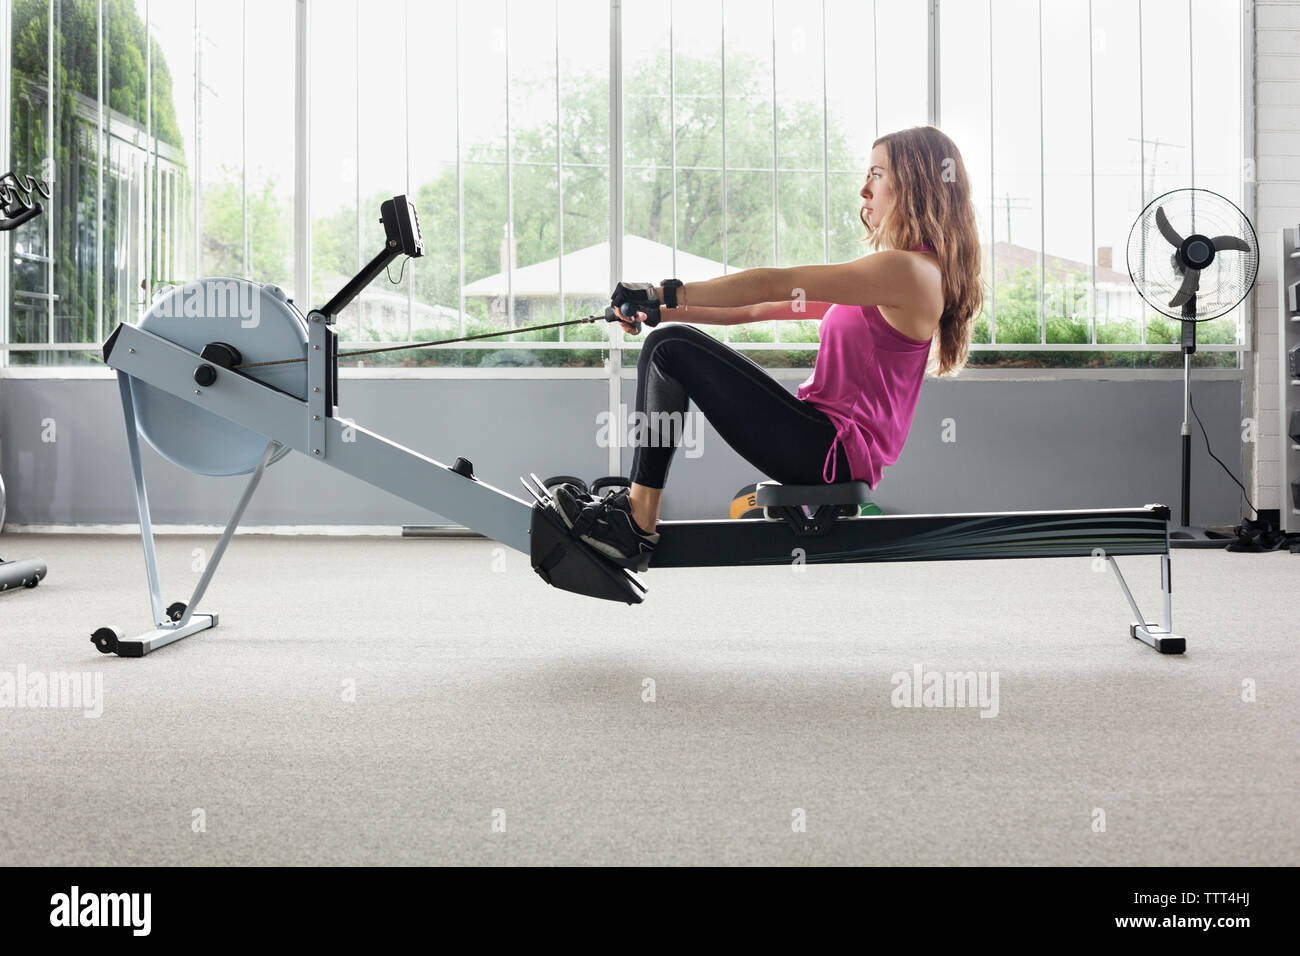 Woman exercising on rowing machine in gym Banque D'Images